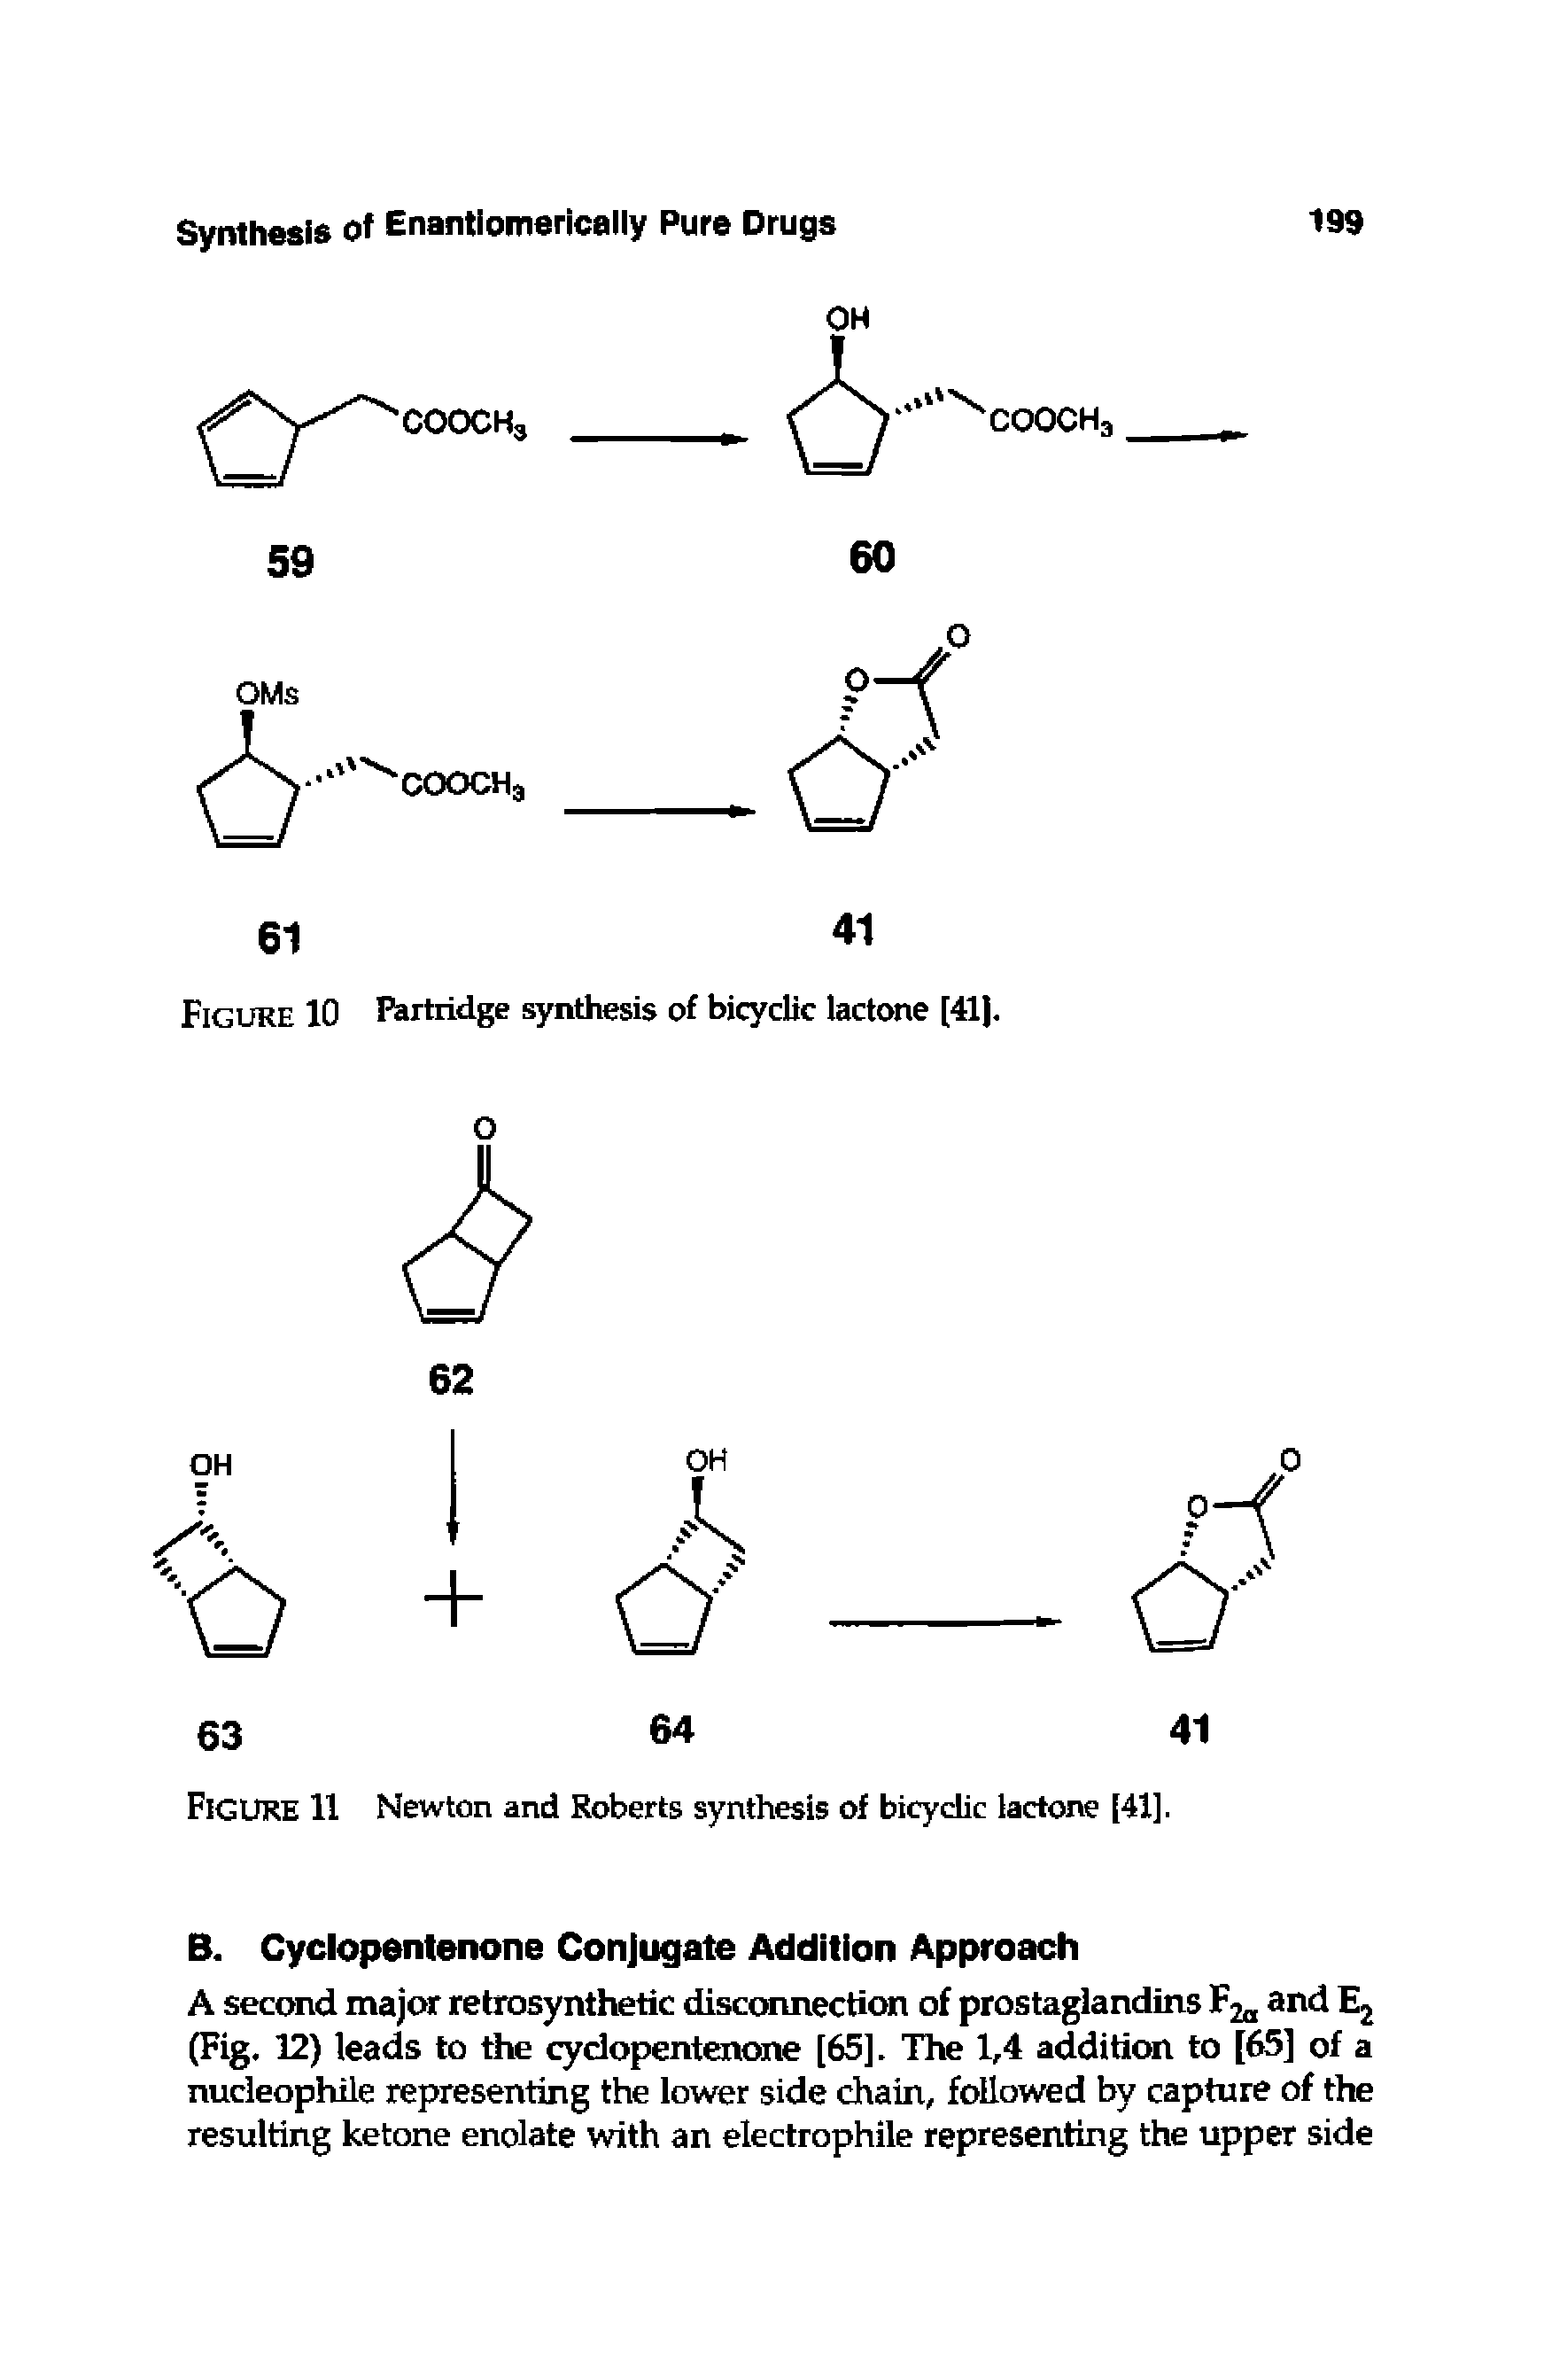 Figure 11 Newton and Roberts synthesis of bicyclic lactone [41].